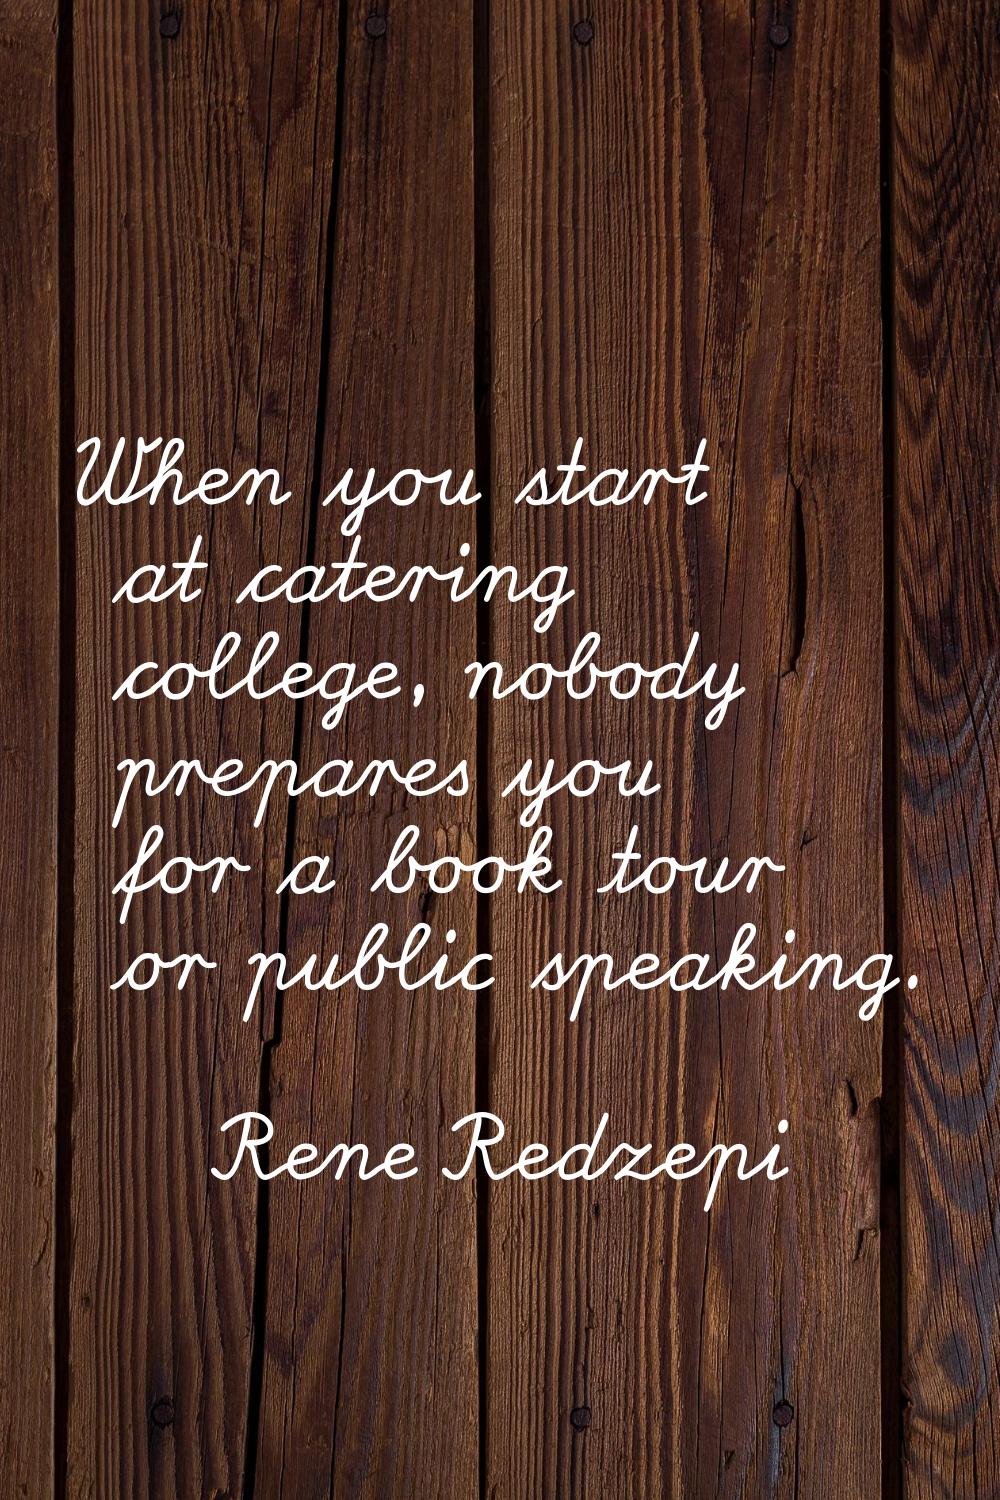 When you start at catering college, nobody prepares you for a book tour or public speaking.